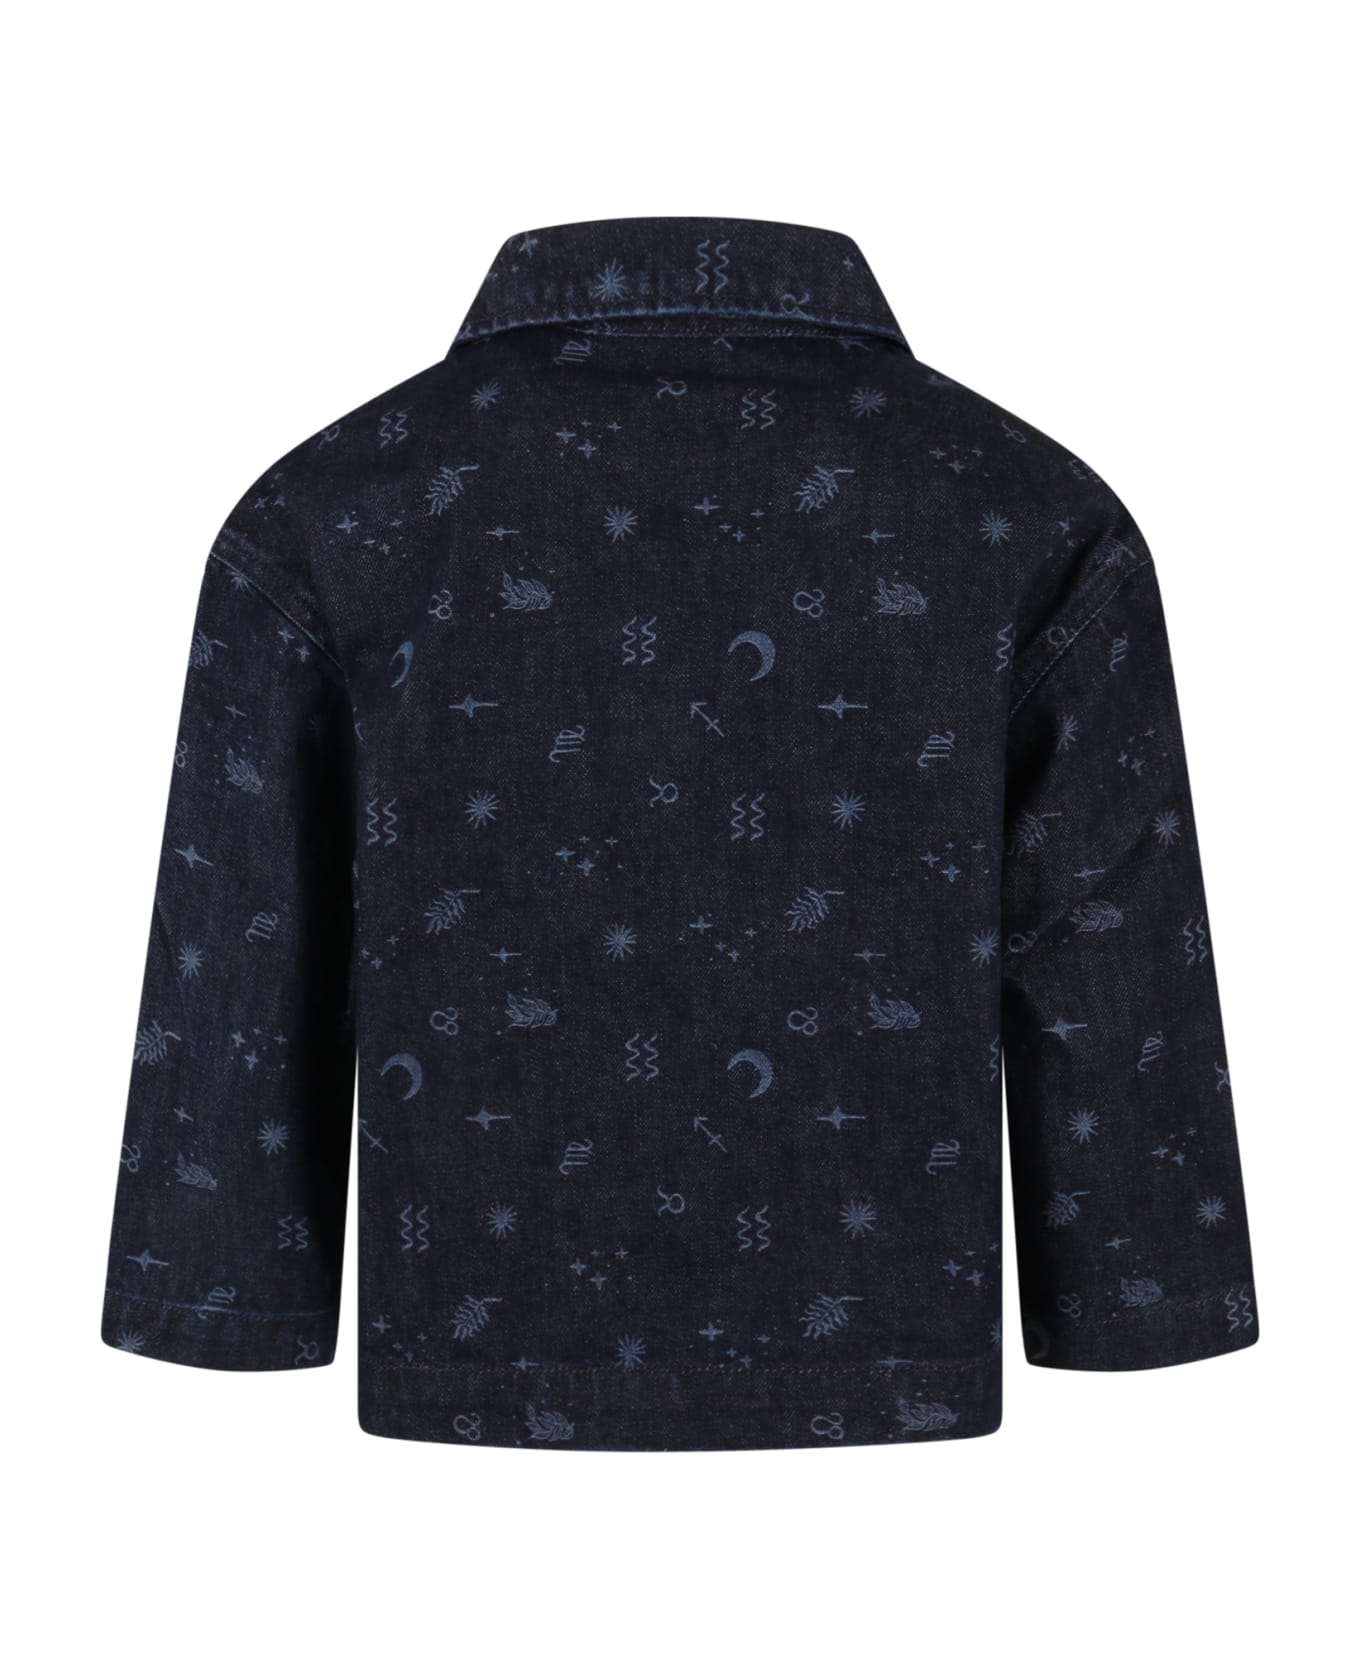 The New Society Blue "cosmos" Shirt For Kids With Zodiac Symbols - Blue